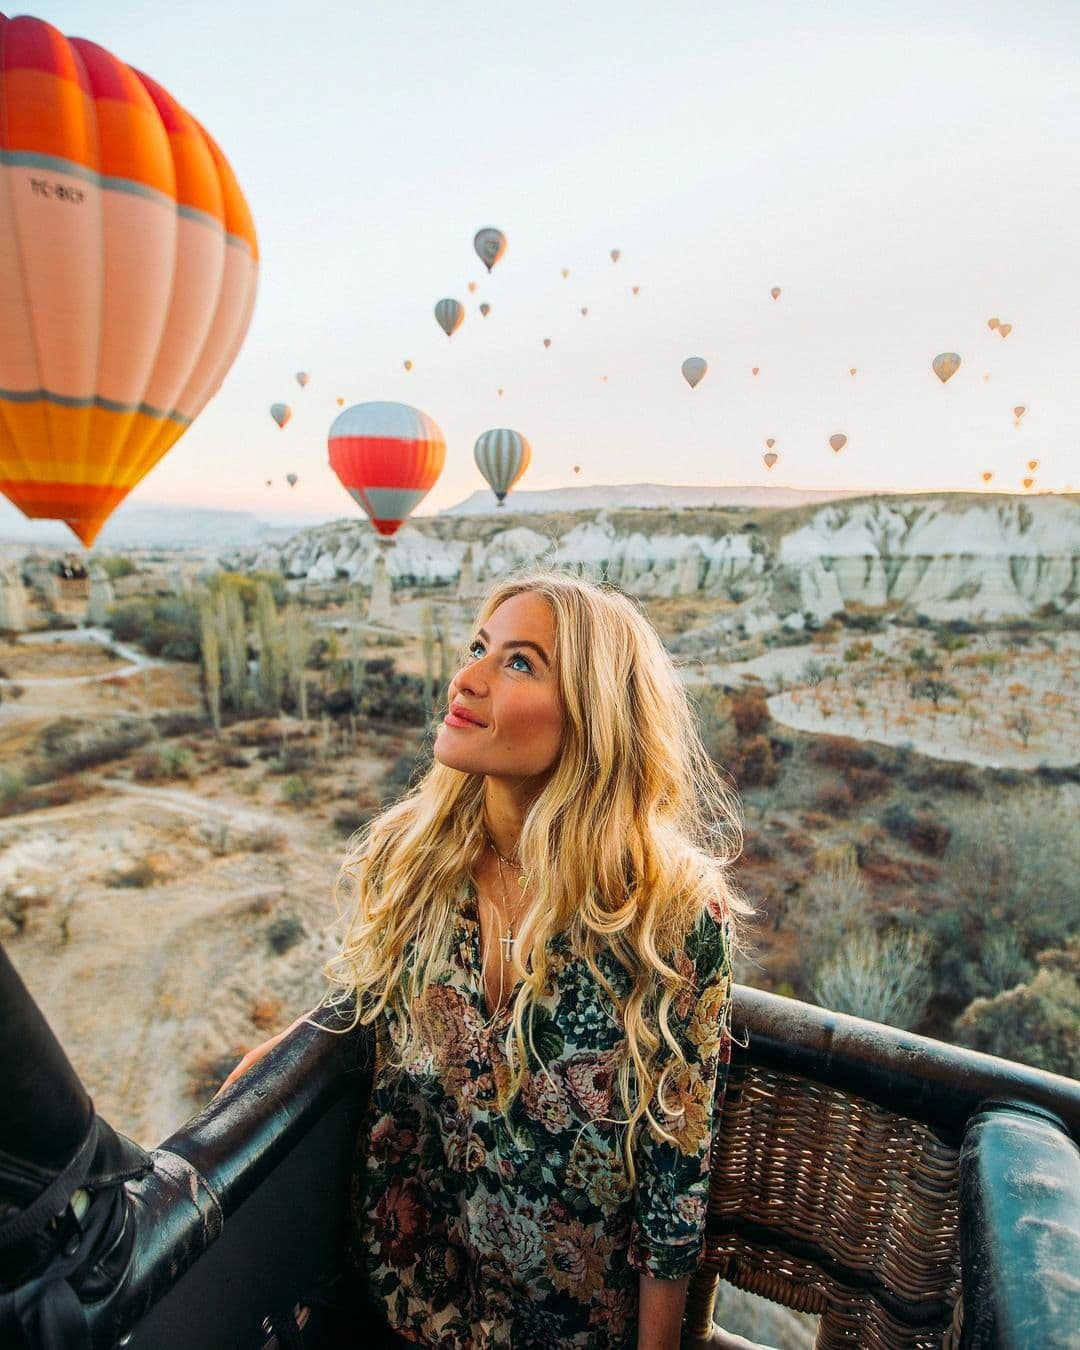 Everything You Need to Know Before Booking a Hot Air Balloon Ride in Cappadocia